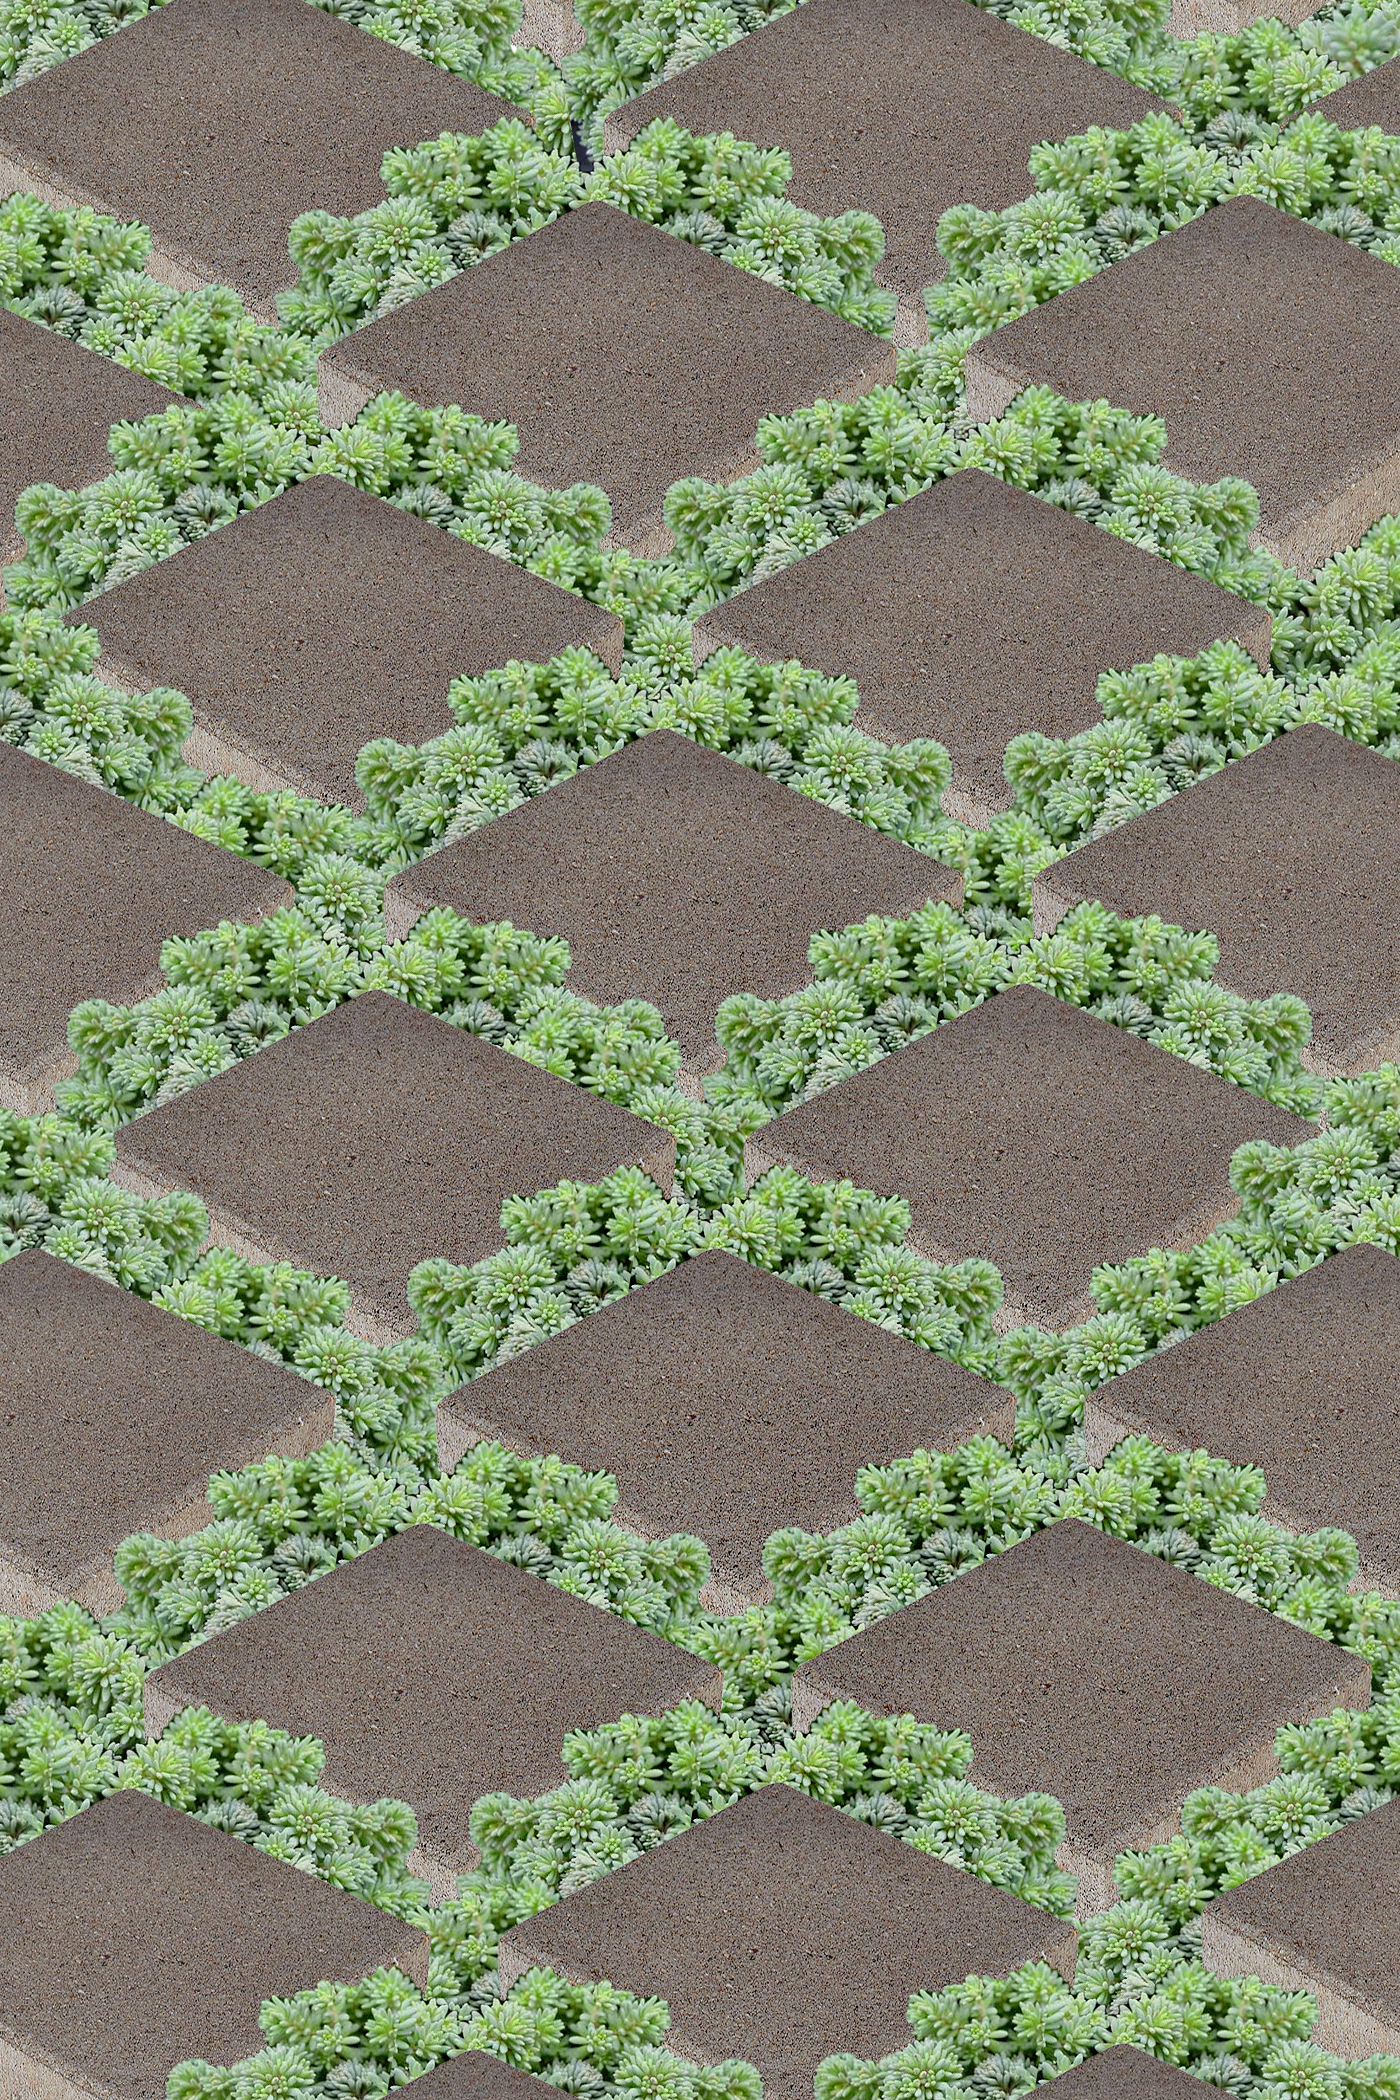 Succulent paver grid patio featured in a modern tropical moodboard.